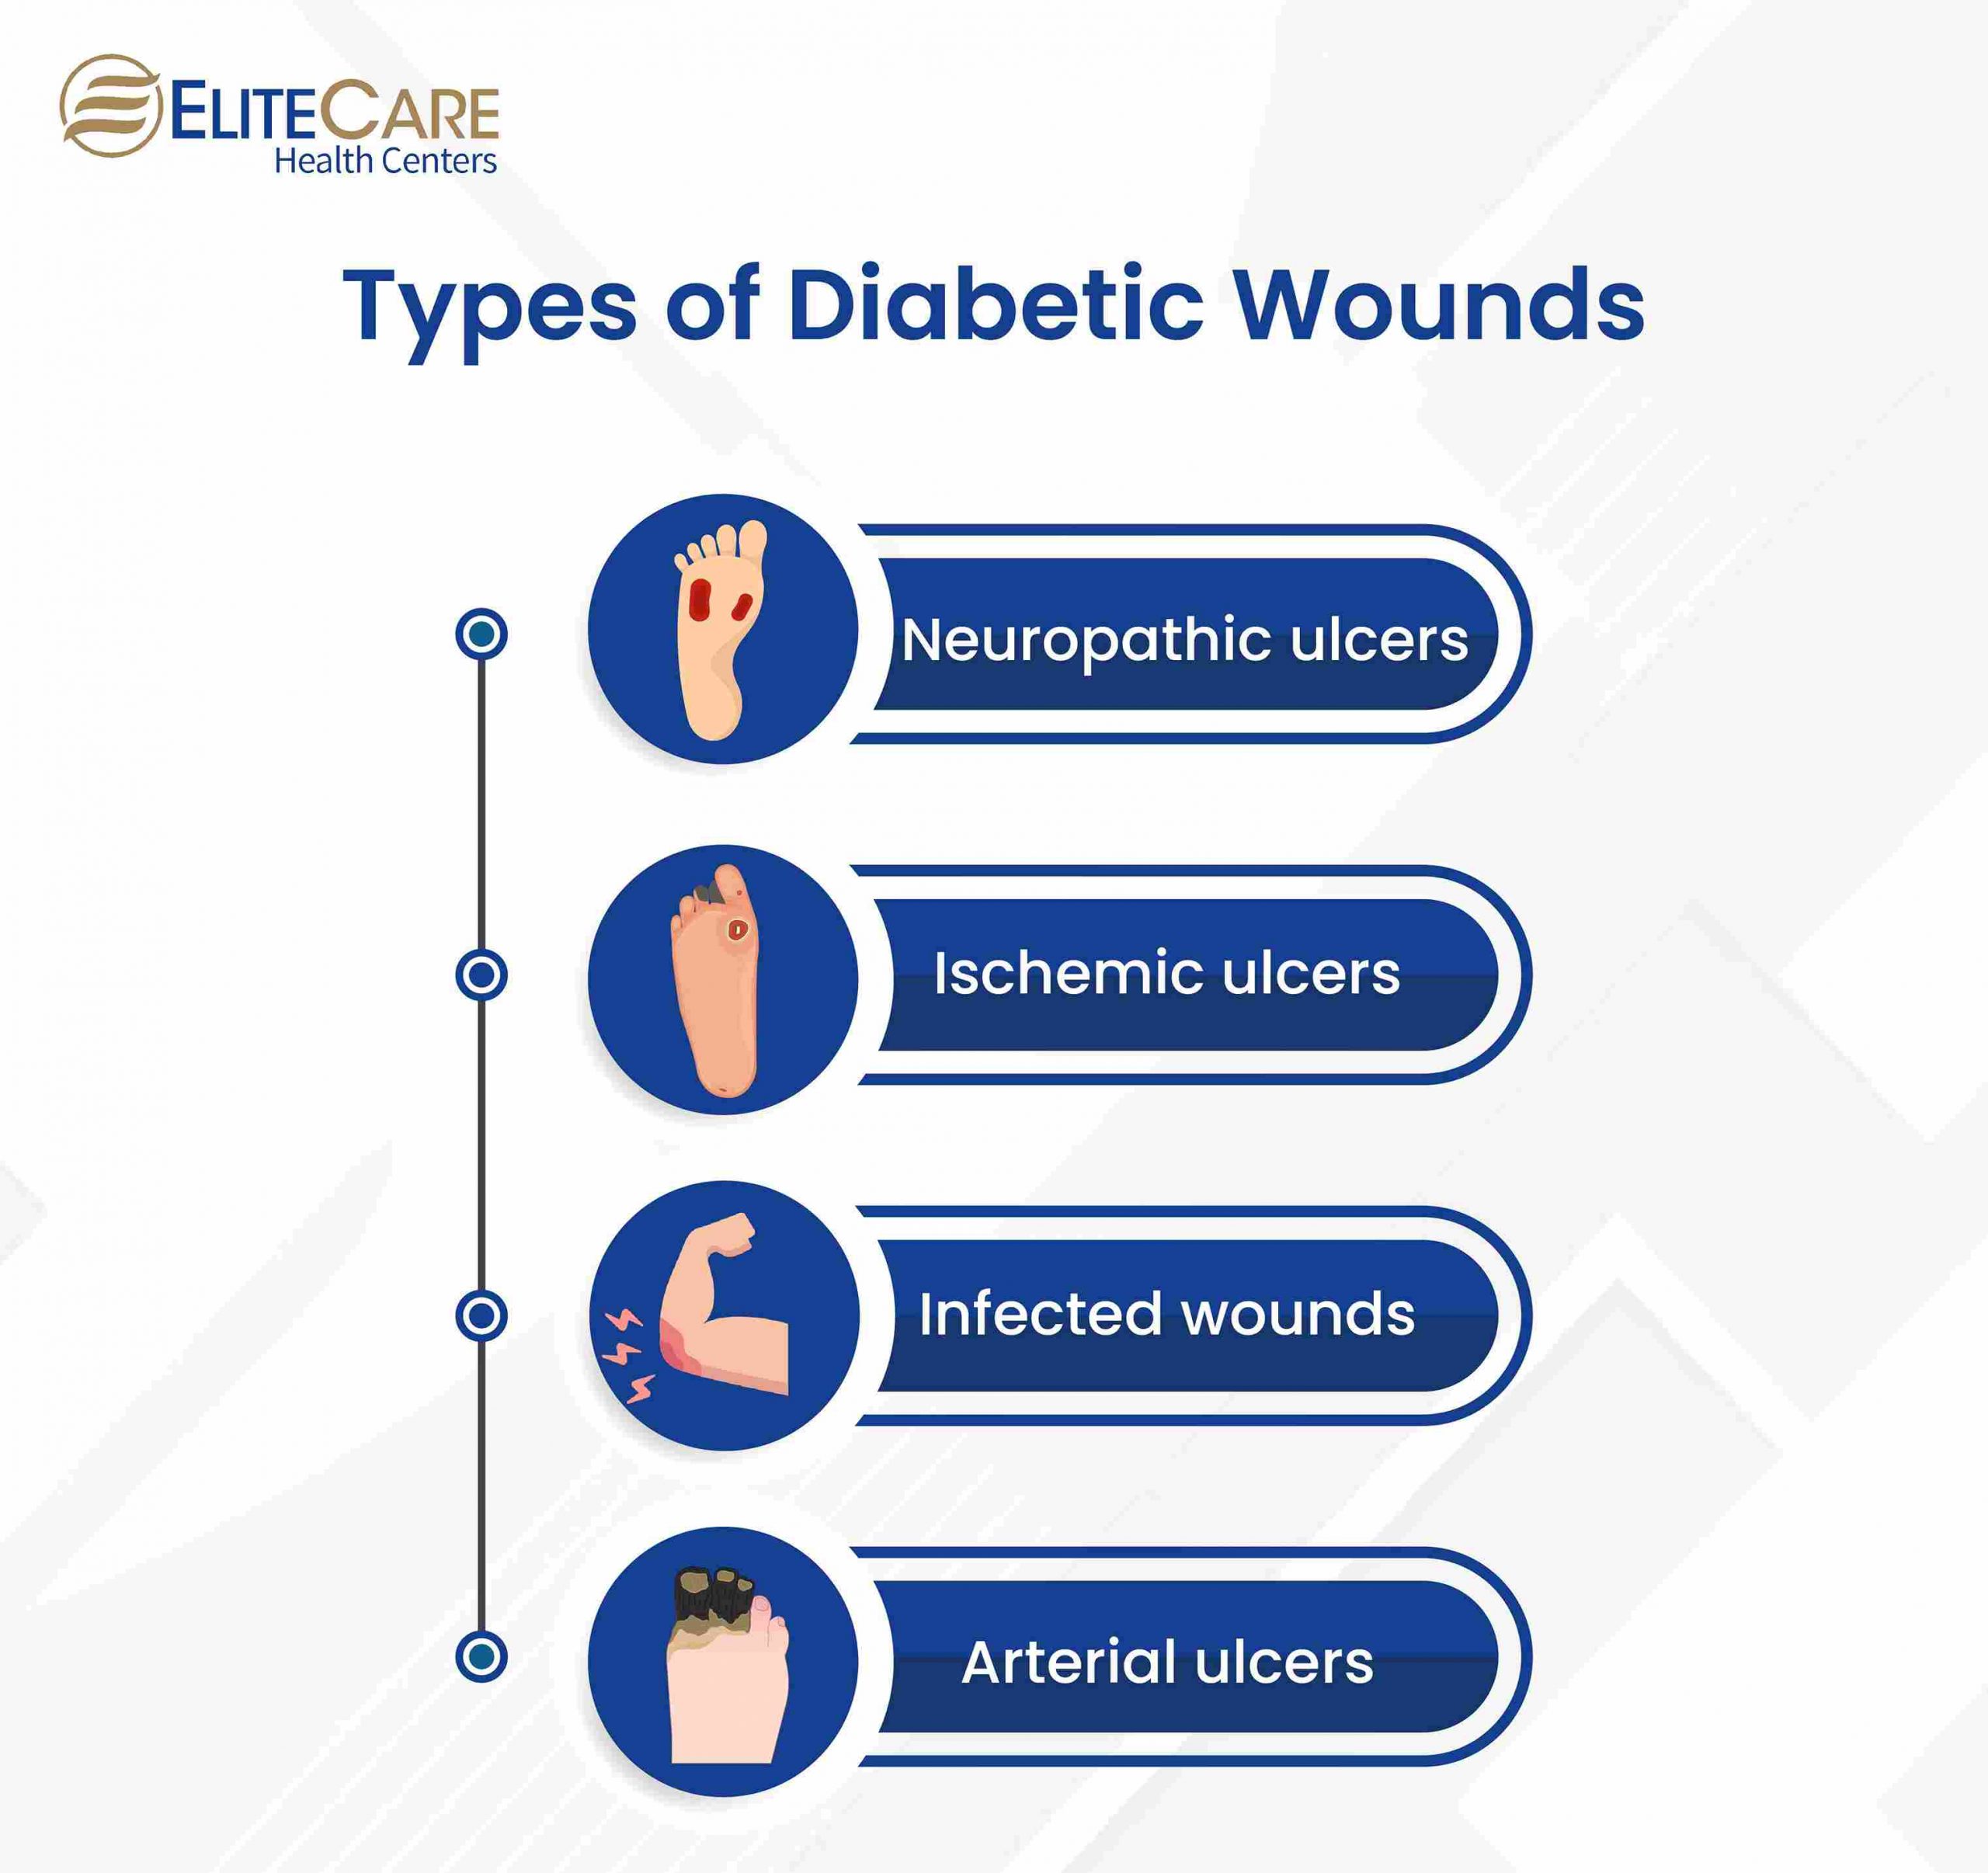 Types of Diabetic Wounds